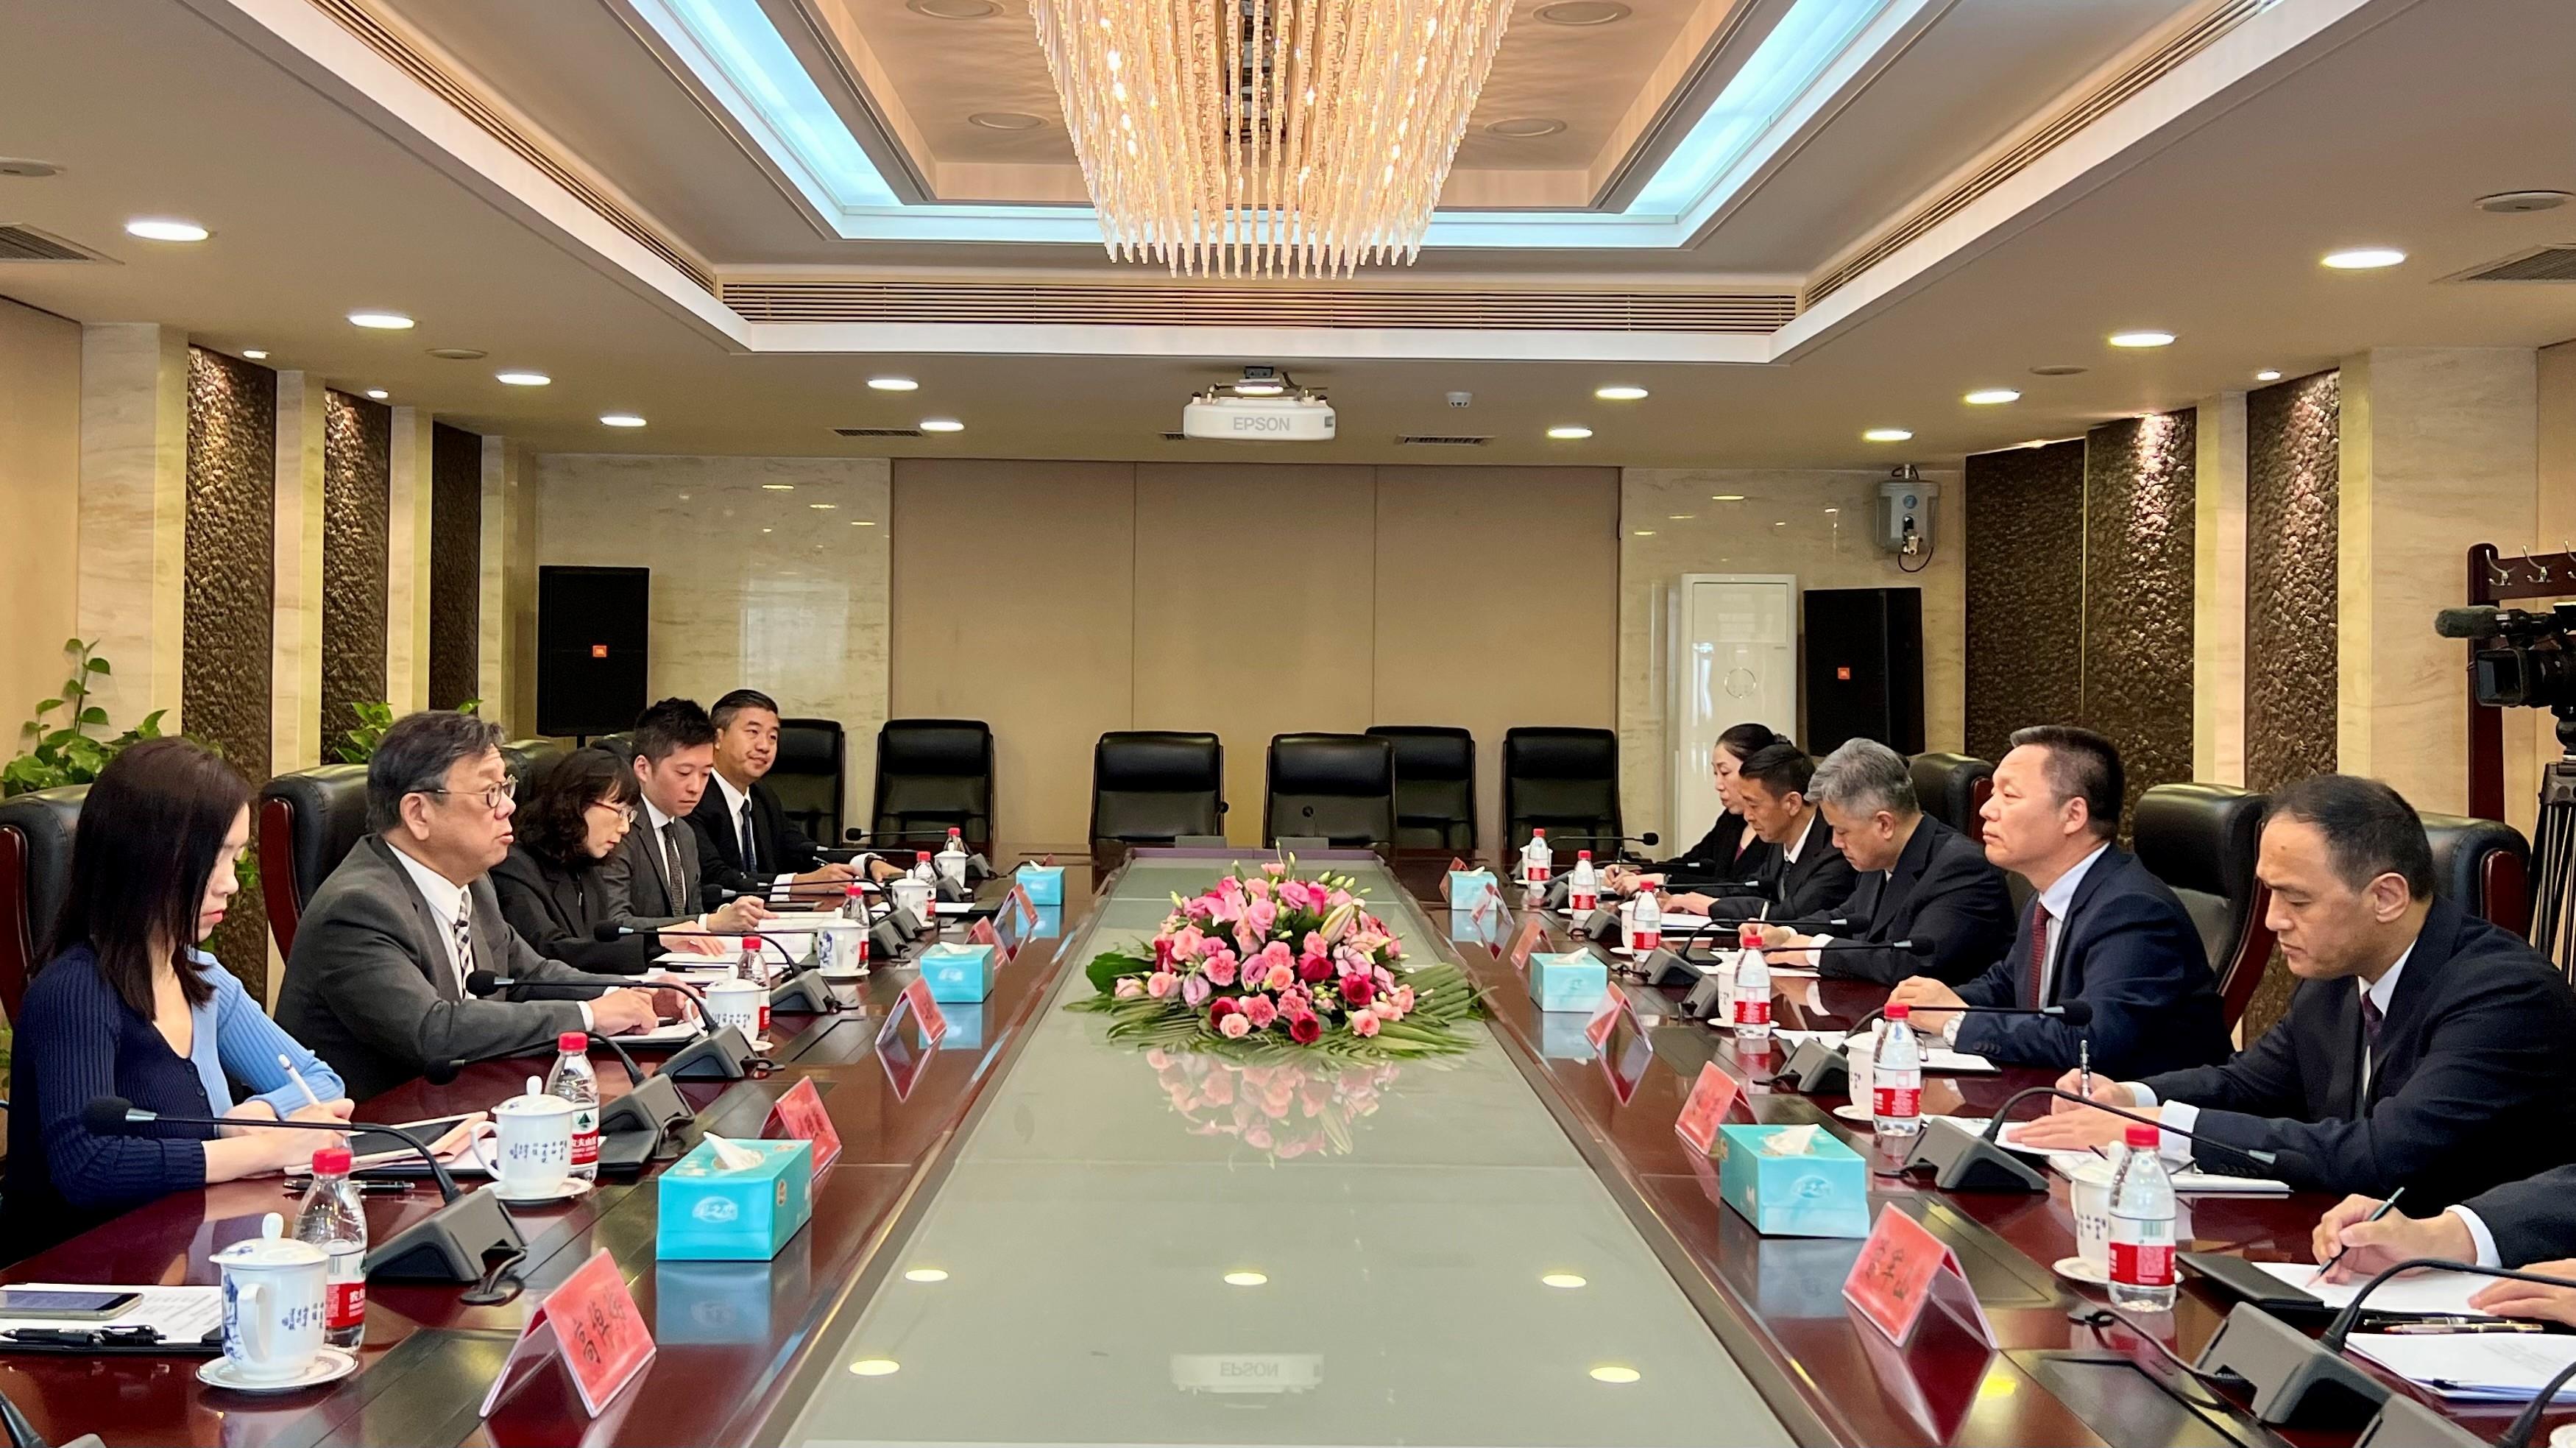 The Secretary for Commerce and Economic Development, Mr Algernon Yau (second left), met with the Director General of the State Post Bureau, Mr Zhao Chongjiu (second right), in Beijing today (April 19) to discuss further collaboration. The Postmaster General, Miss Leonia Tai (third left), also attended the meeting.